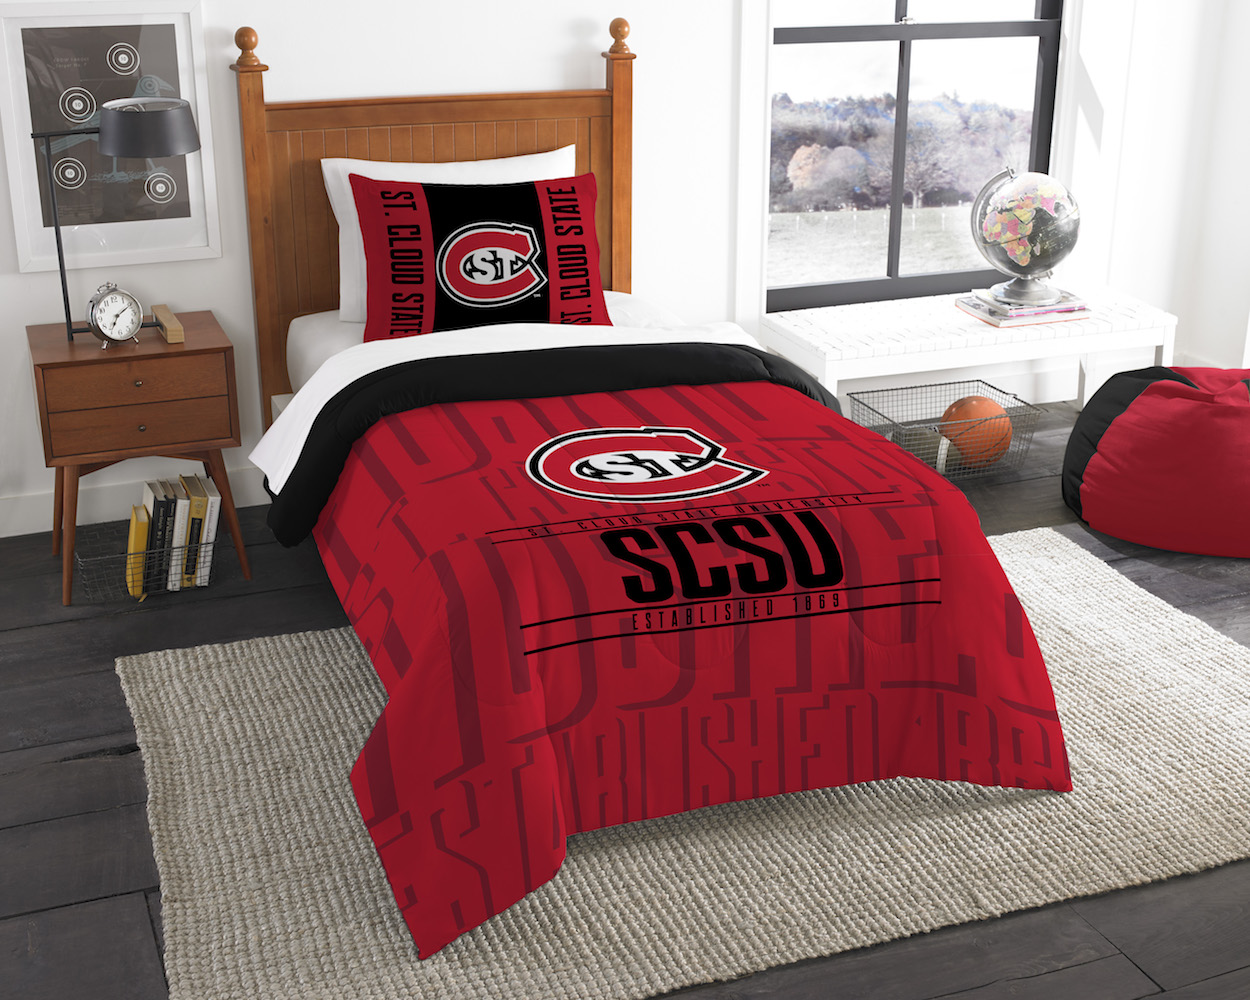 St. Cloud State Huskies Twin Comforter Set with Sham